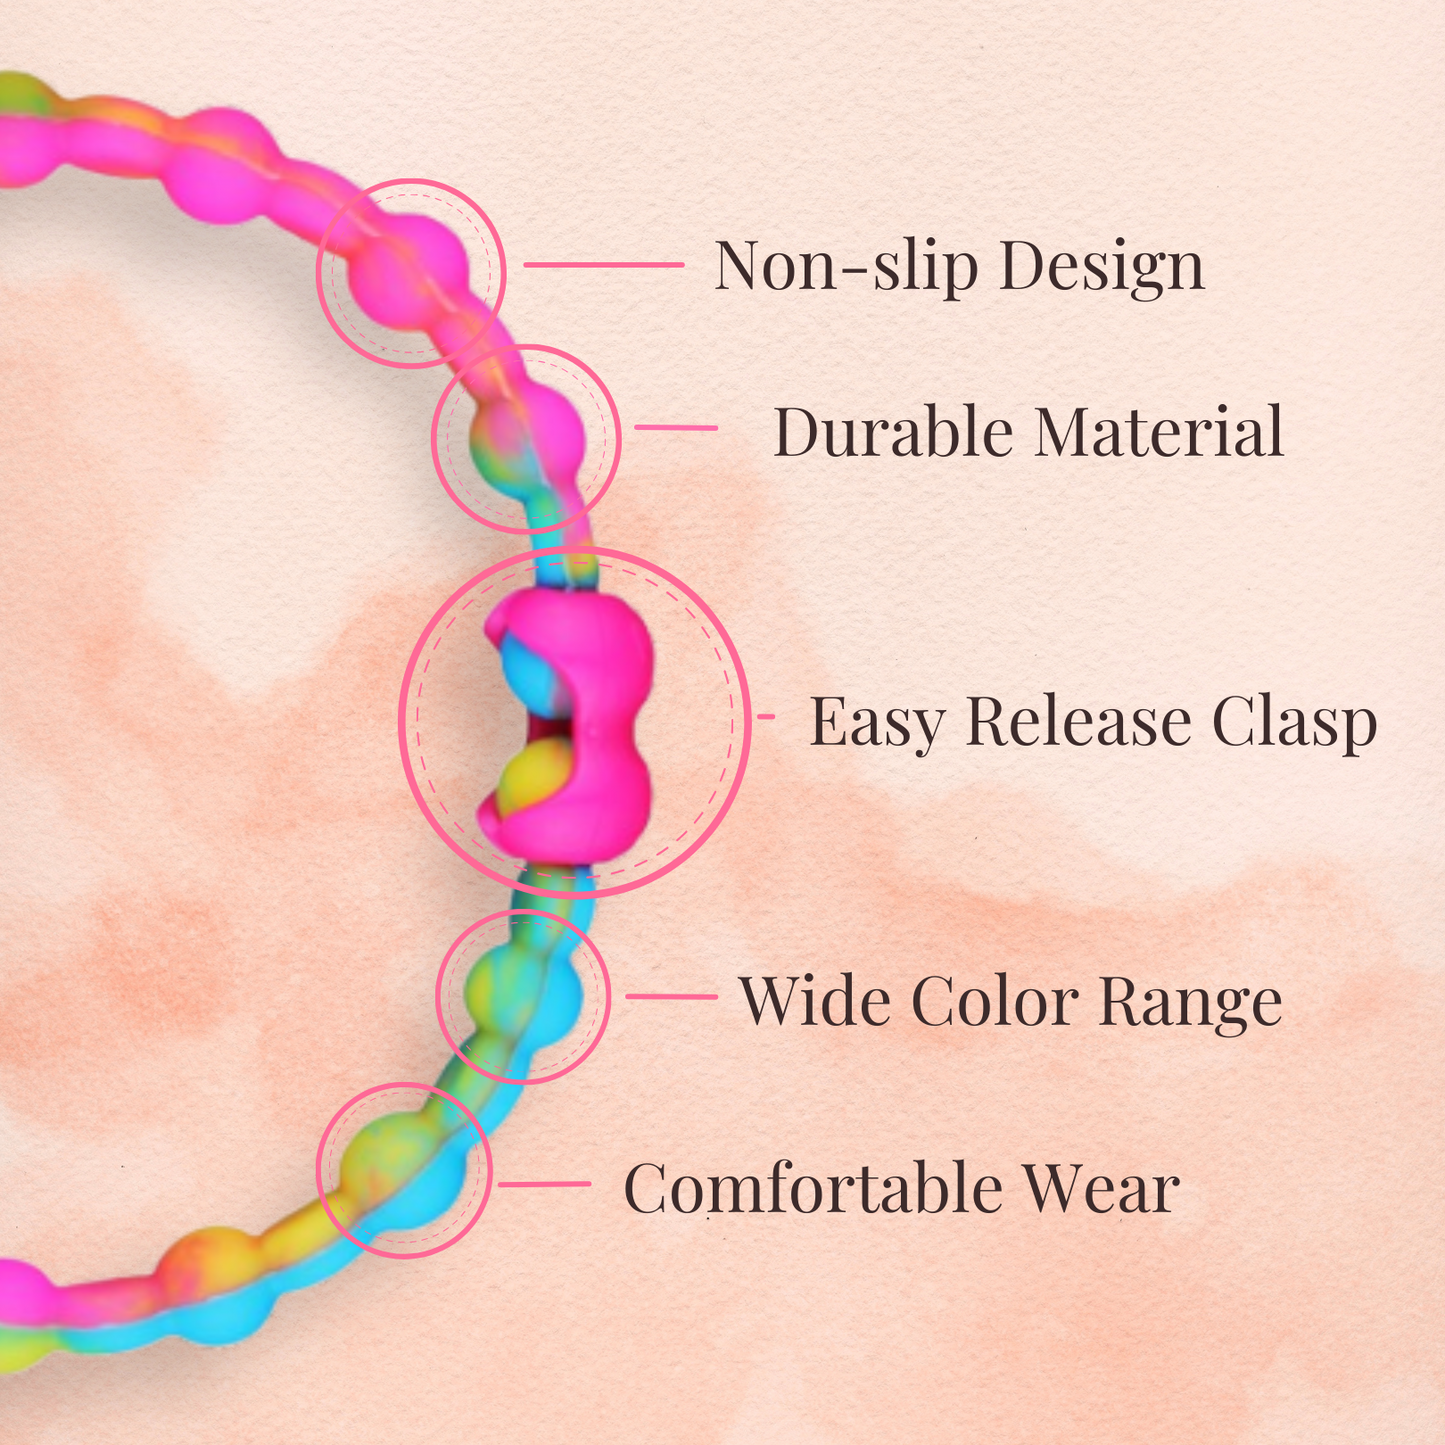 Clear Neon Orange Hair Ties (8 Pack) - A Burst of Citrusy Energy for Every Style